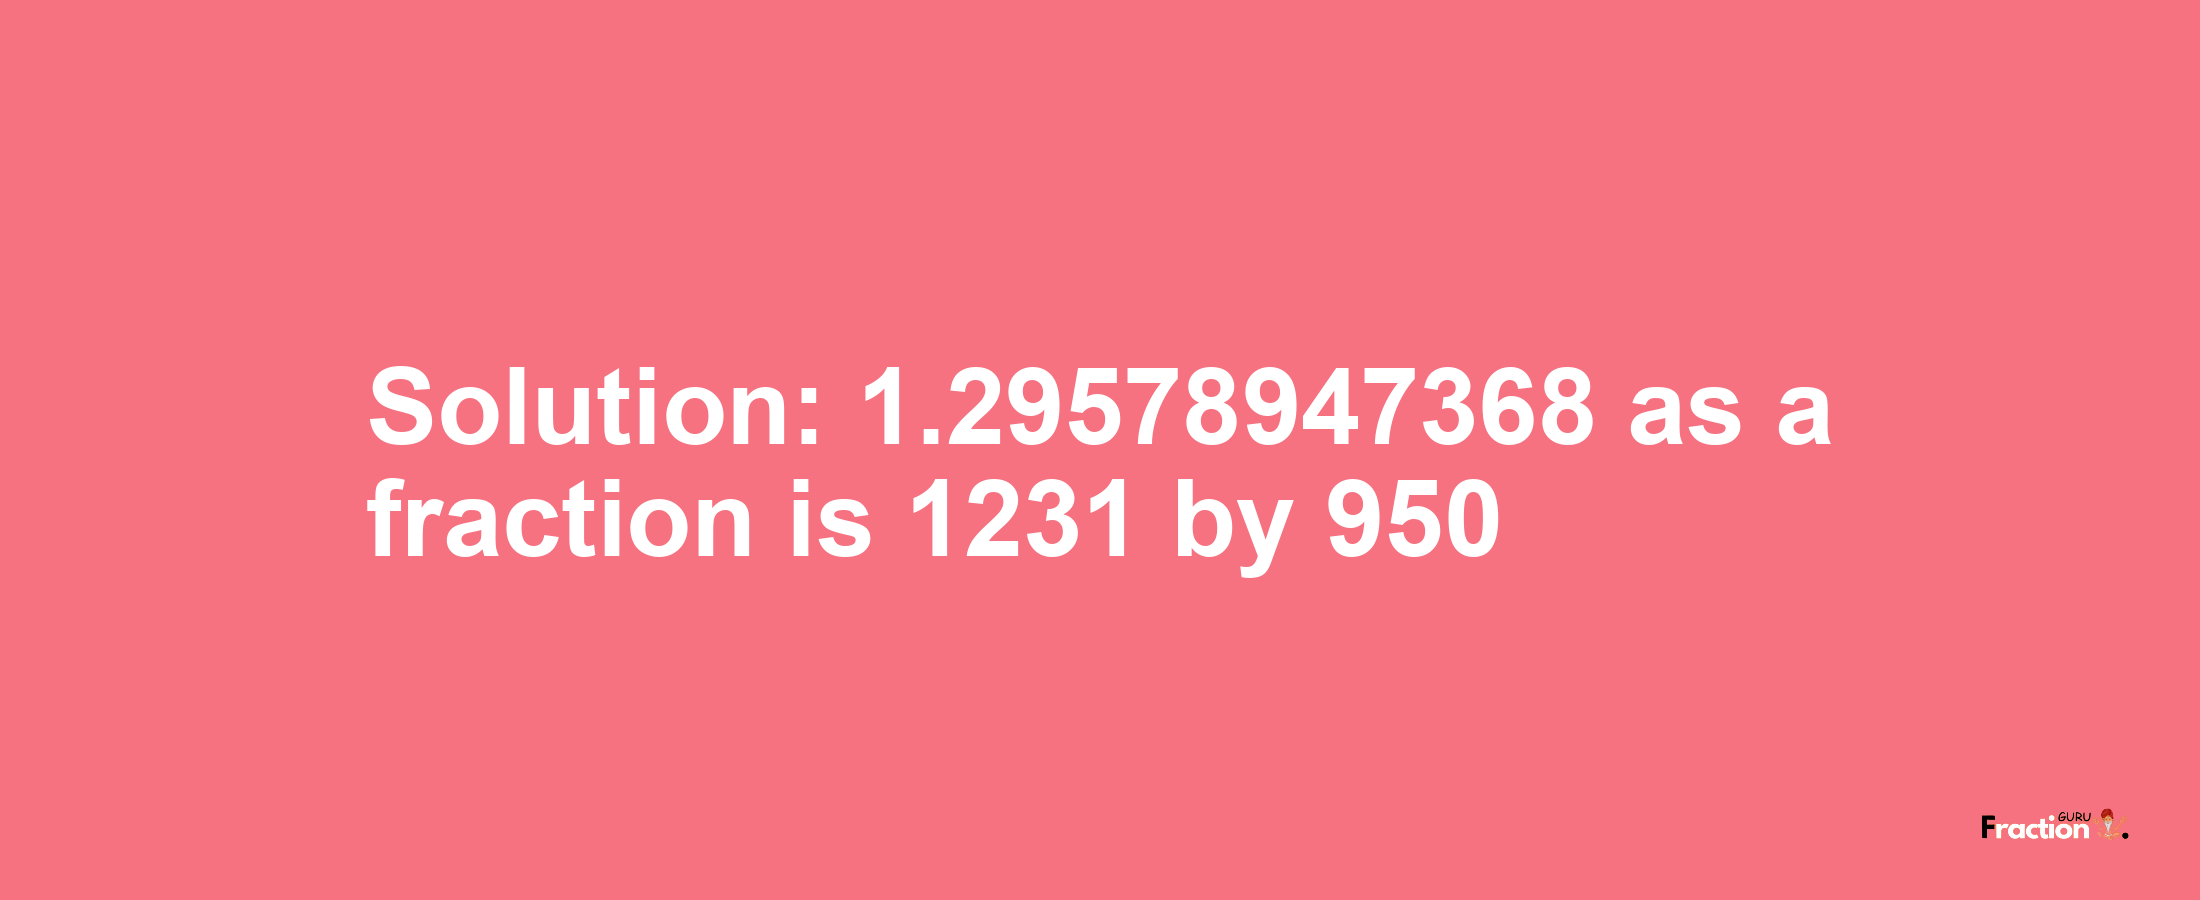 Solution:1.29578947368 as a fraction is 1231/950